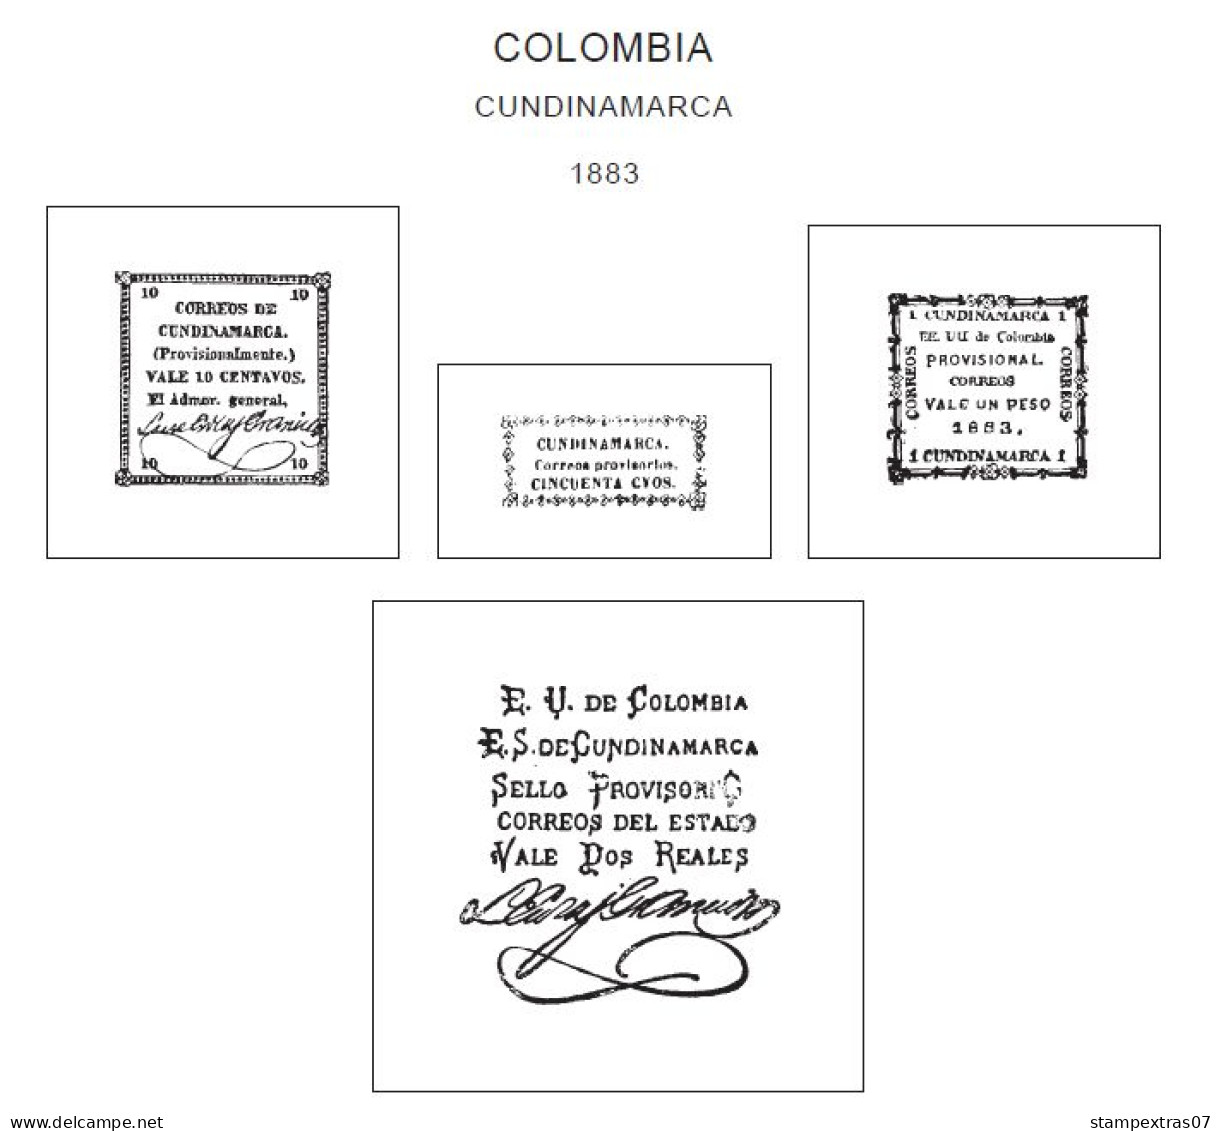 COLOMBIA STAMP ALBUM PAGES 1859-2011 (353 Pages) - Englisch